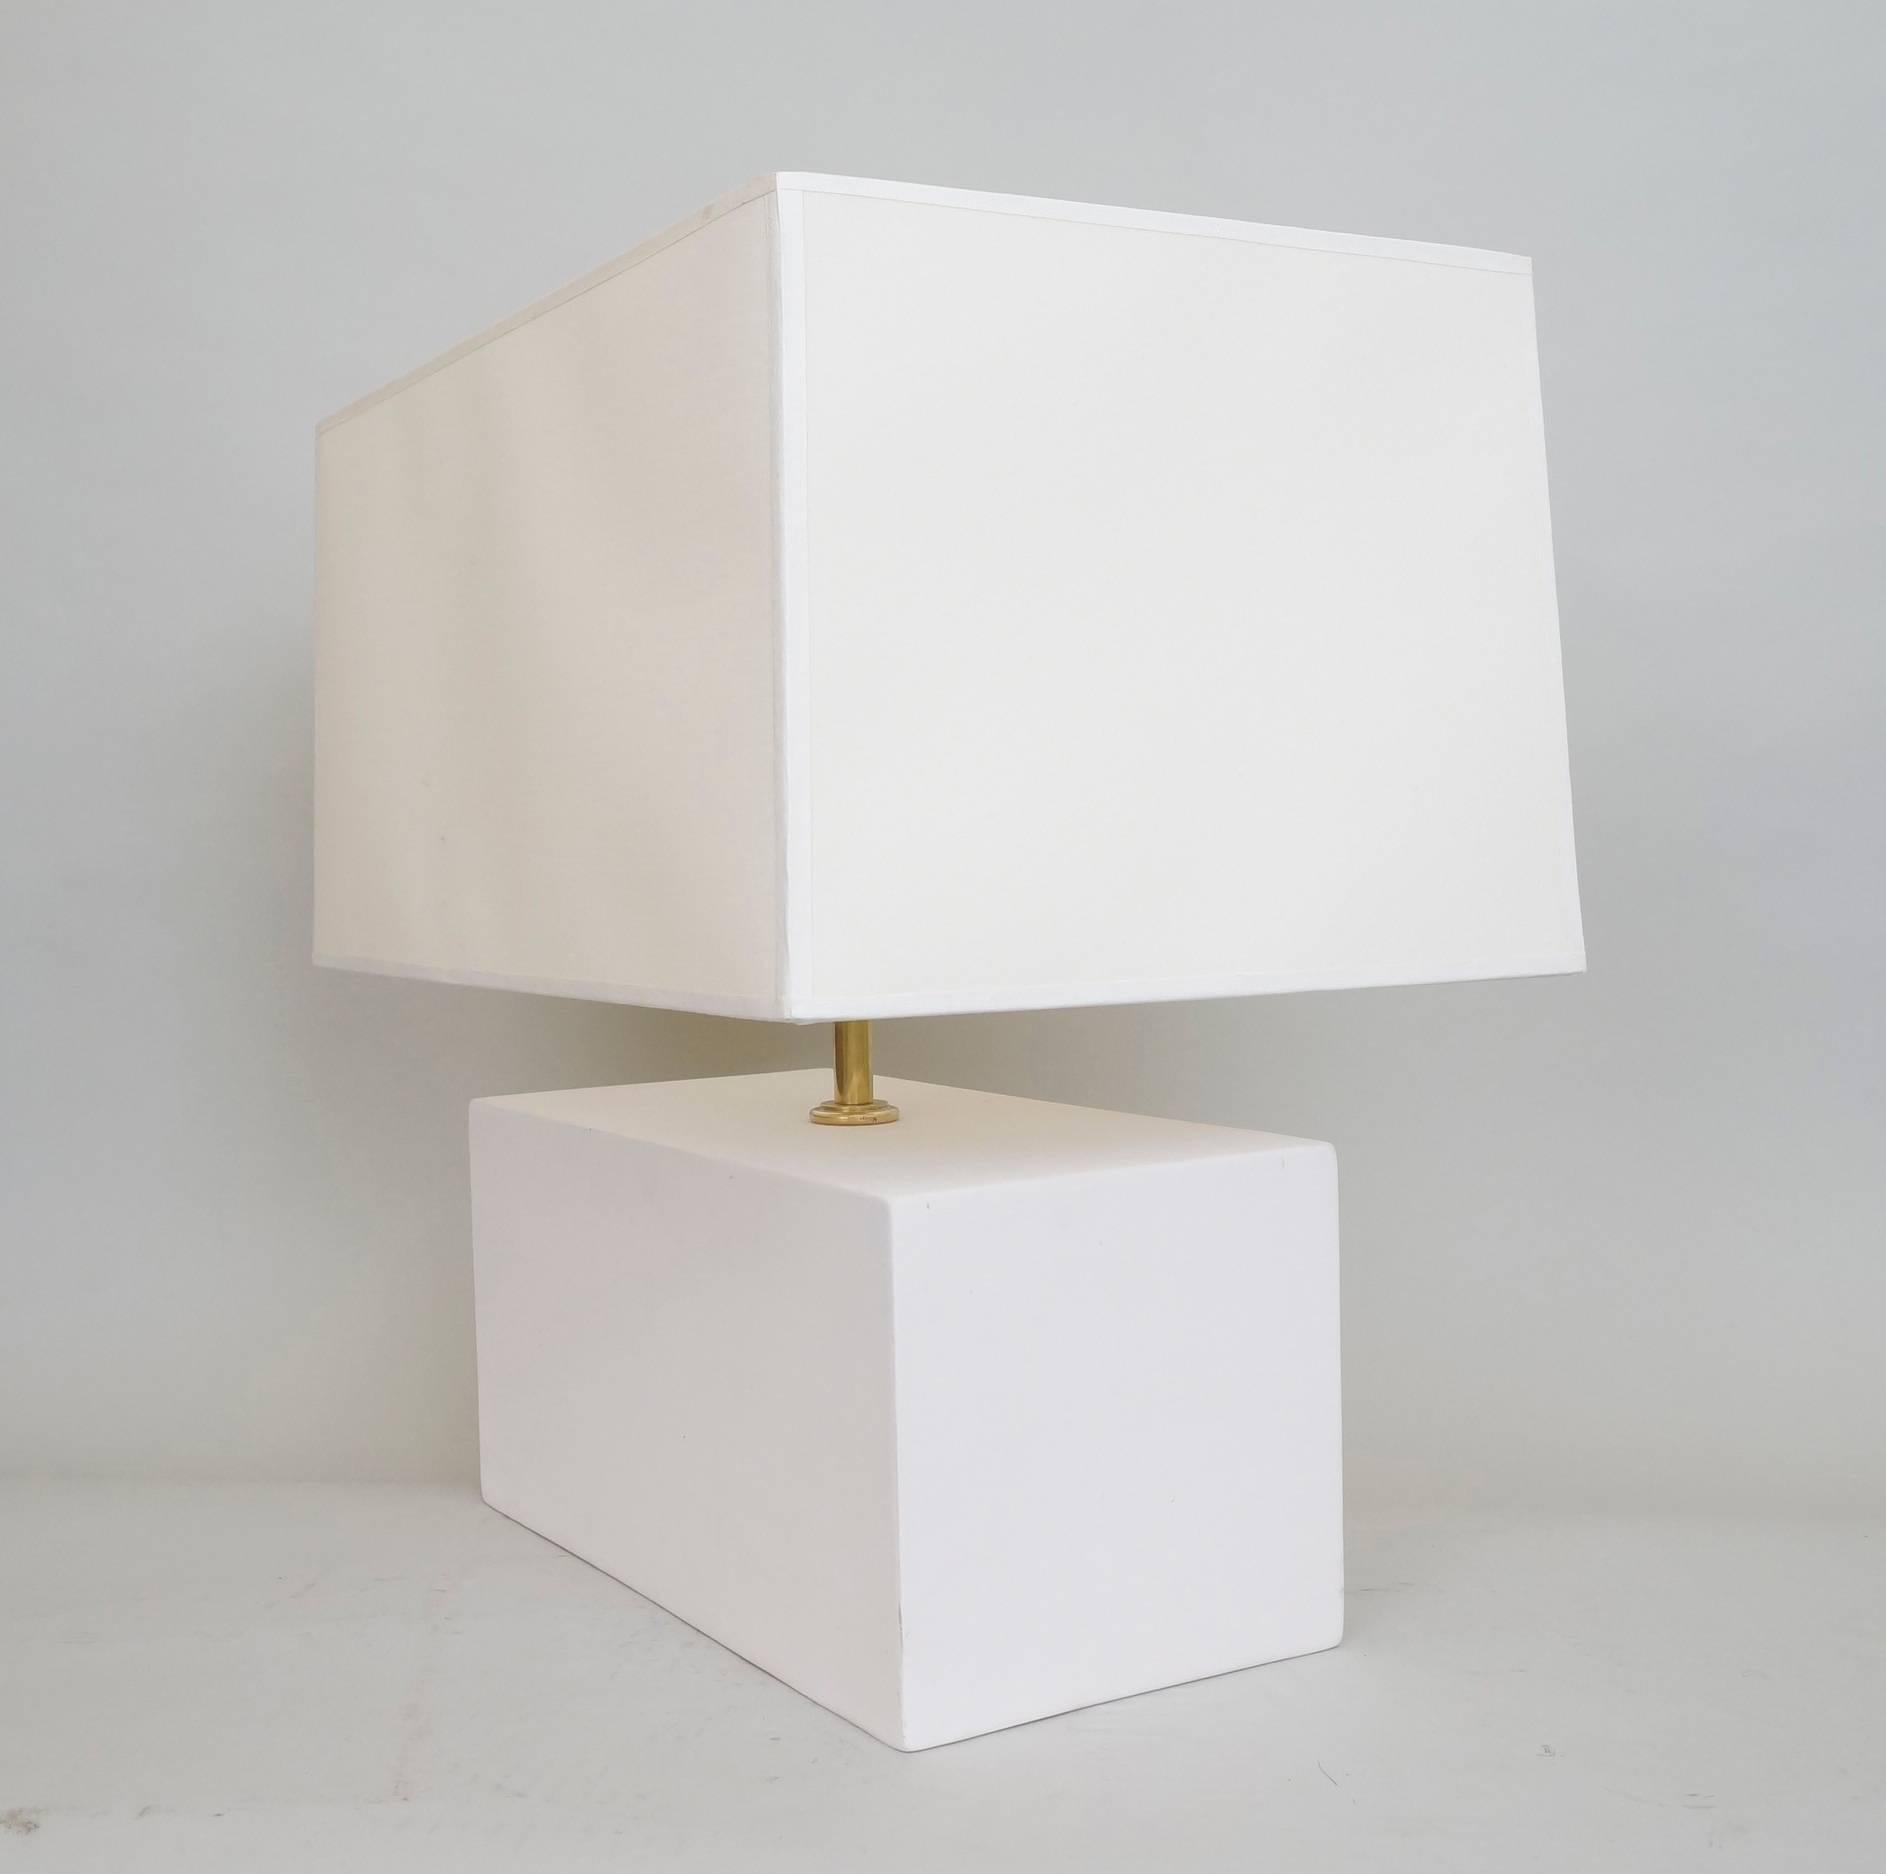 French Mid-20th Century Pair of Rectangular Ceramic Table Lamps